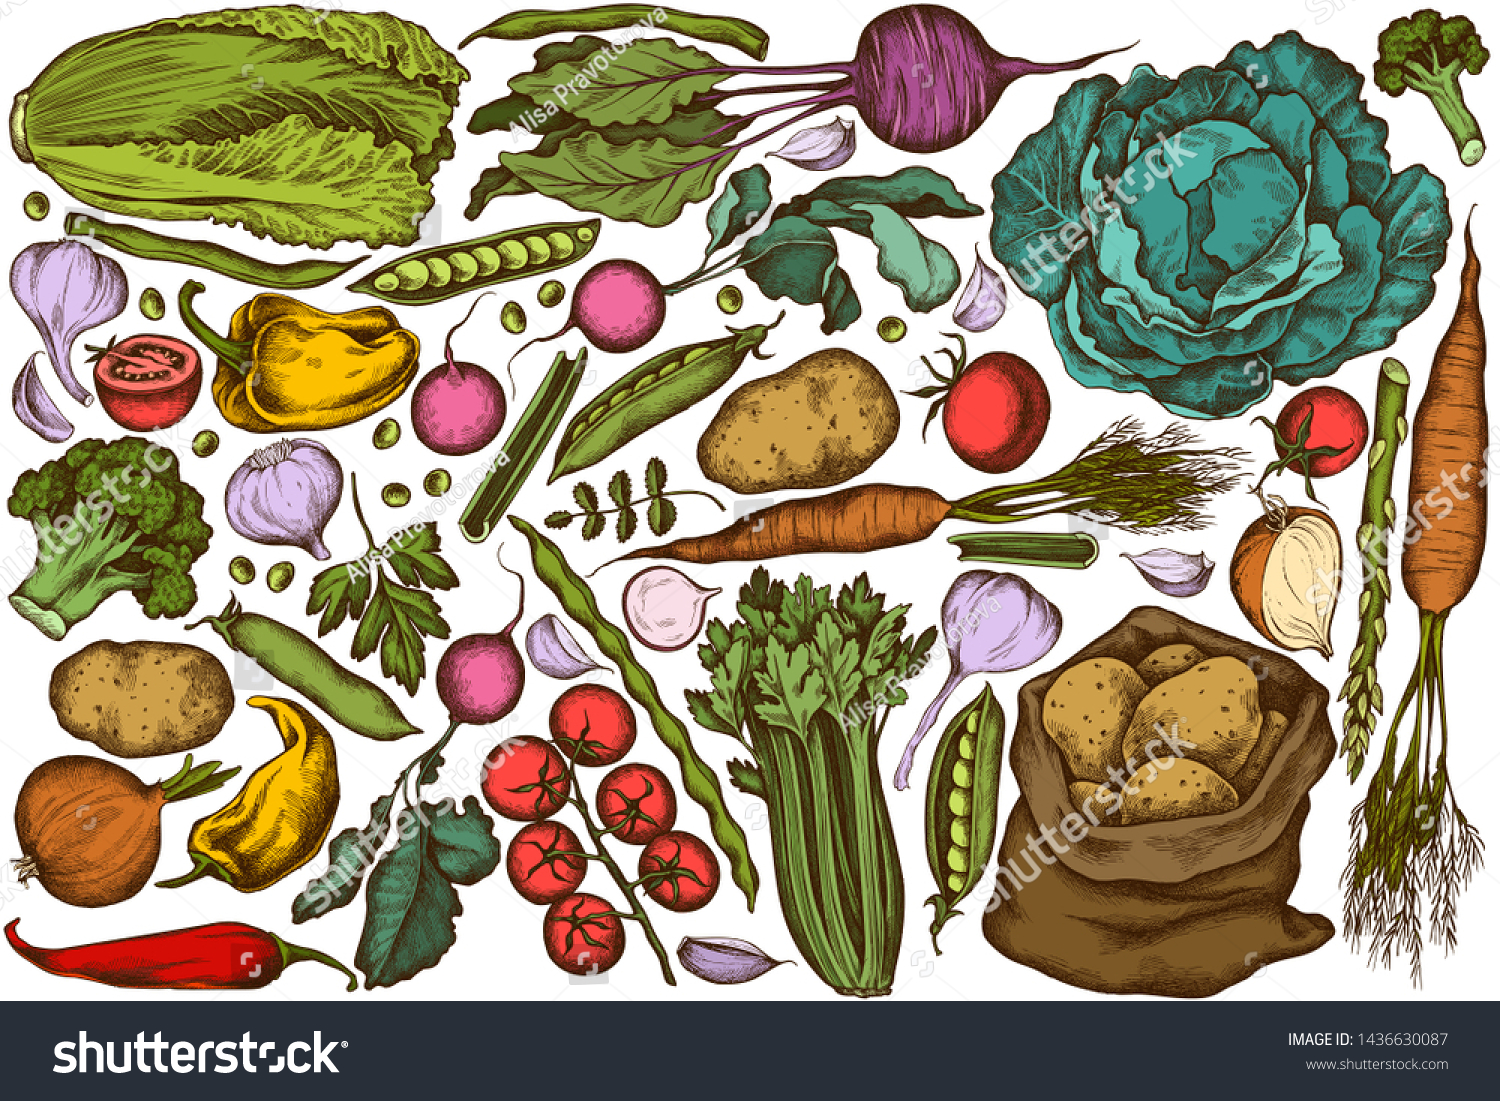 Vector set of hand drawn colored onion, garlic, pepper, broccoli, radish, green beans, potatoes, cherry tomatoes, peas, celery, beet, greenery, chinese cabbage, cabbage, carrot #1436630087